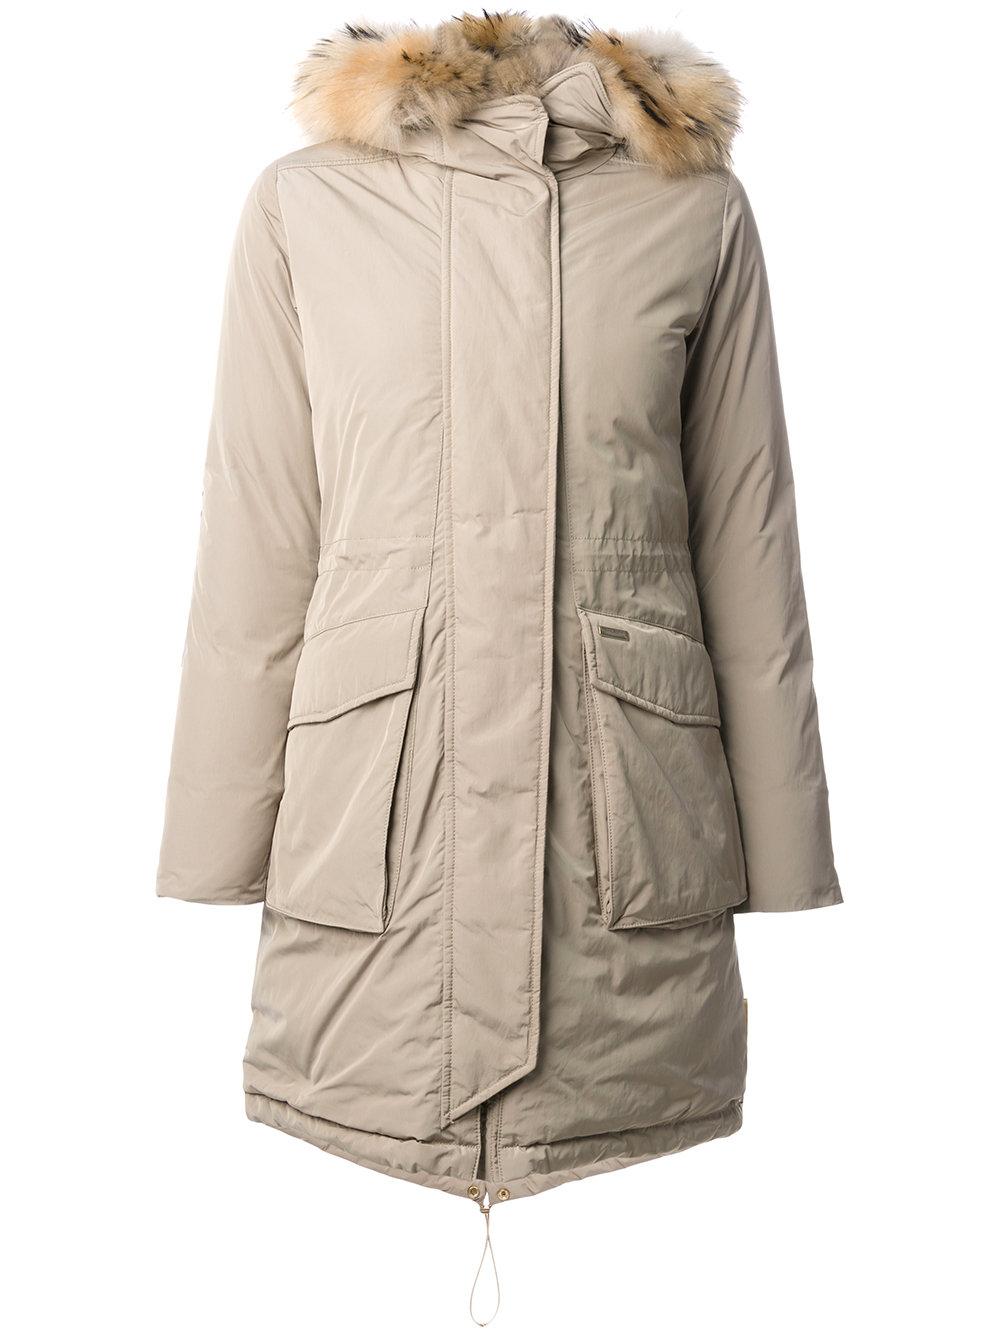 Lyst - Woolrich Military Parka With Fur in Natural